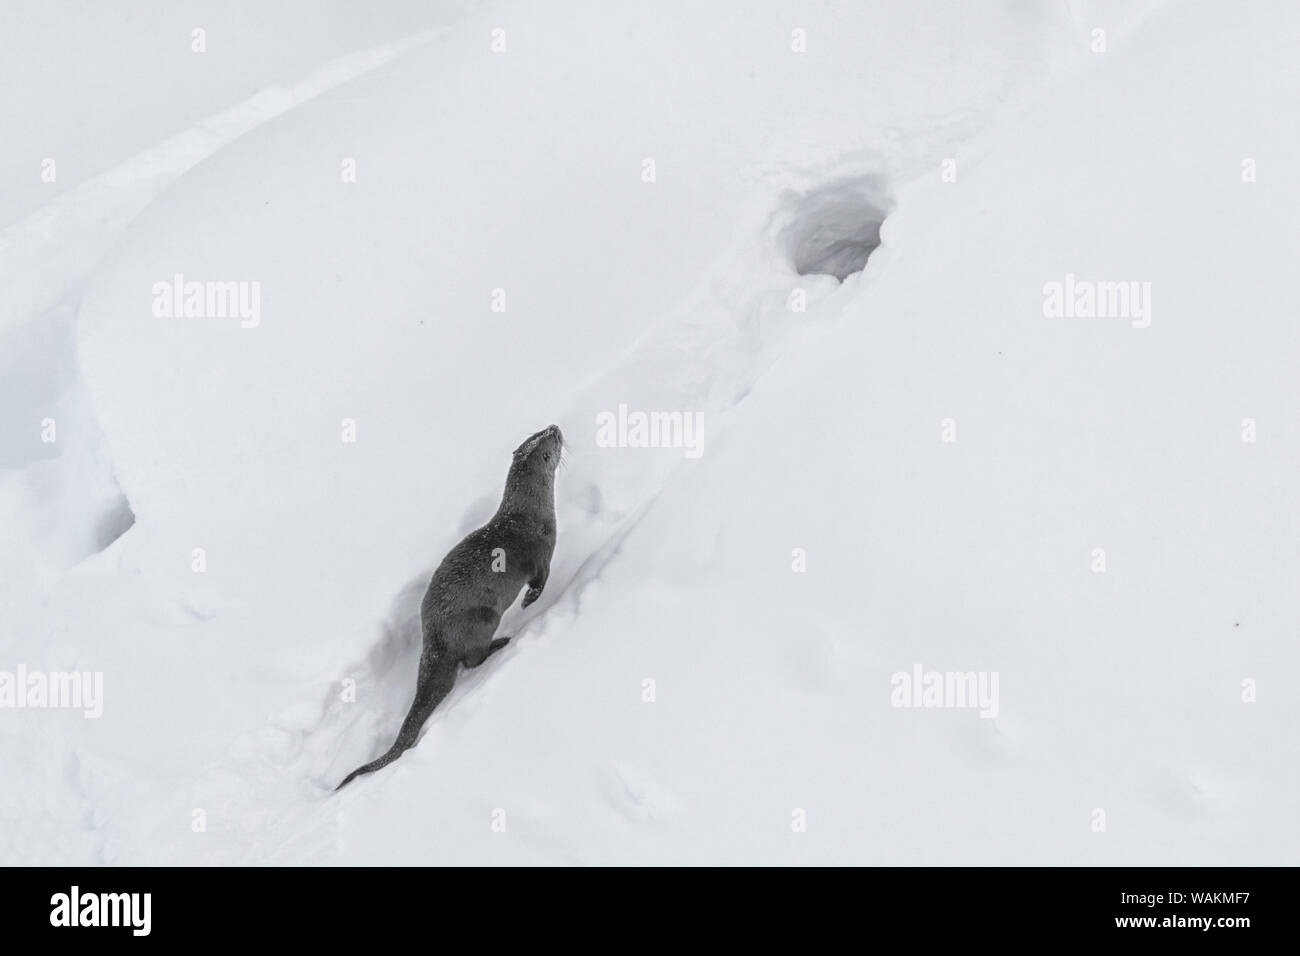 Usa, Wyoming, Yellowstone National Park. Northern river otter runs up the snow slide to its den. Stock Photo